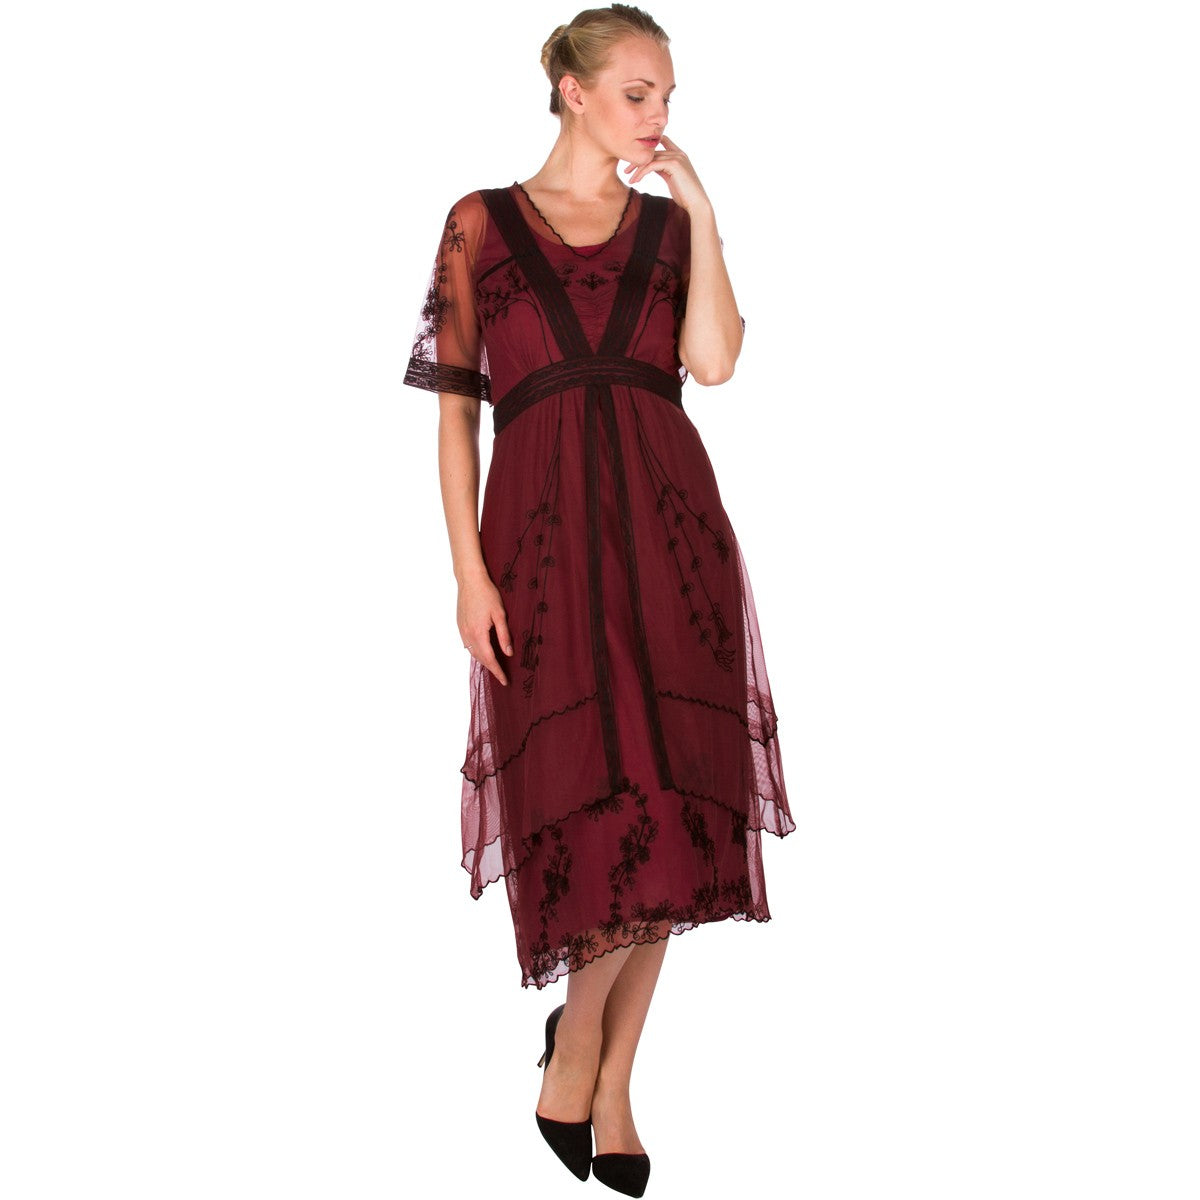 Vintage Inspired Embroidered Party Dress in Wine by Nataya - SOLD OUT